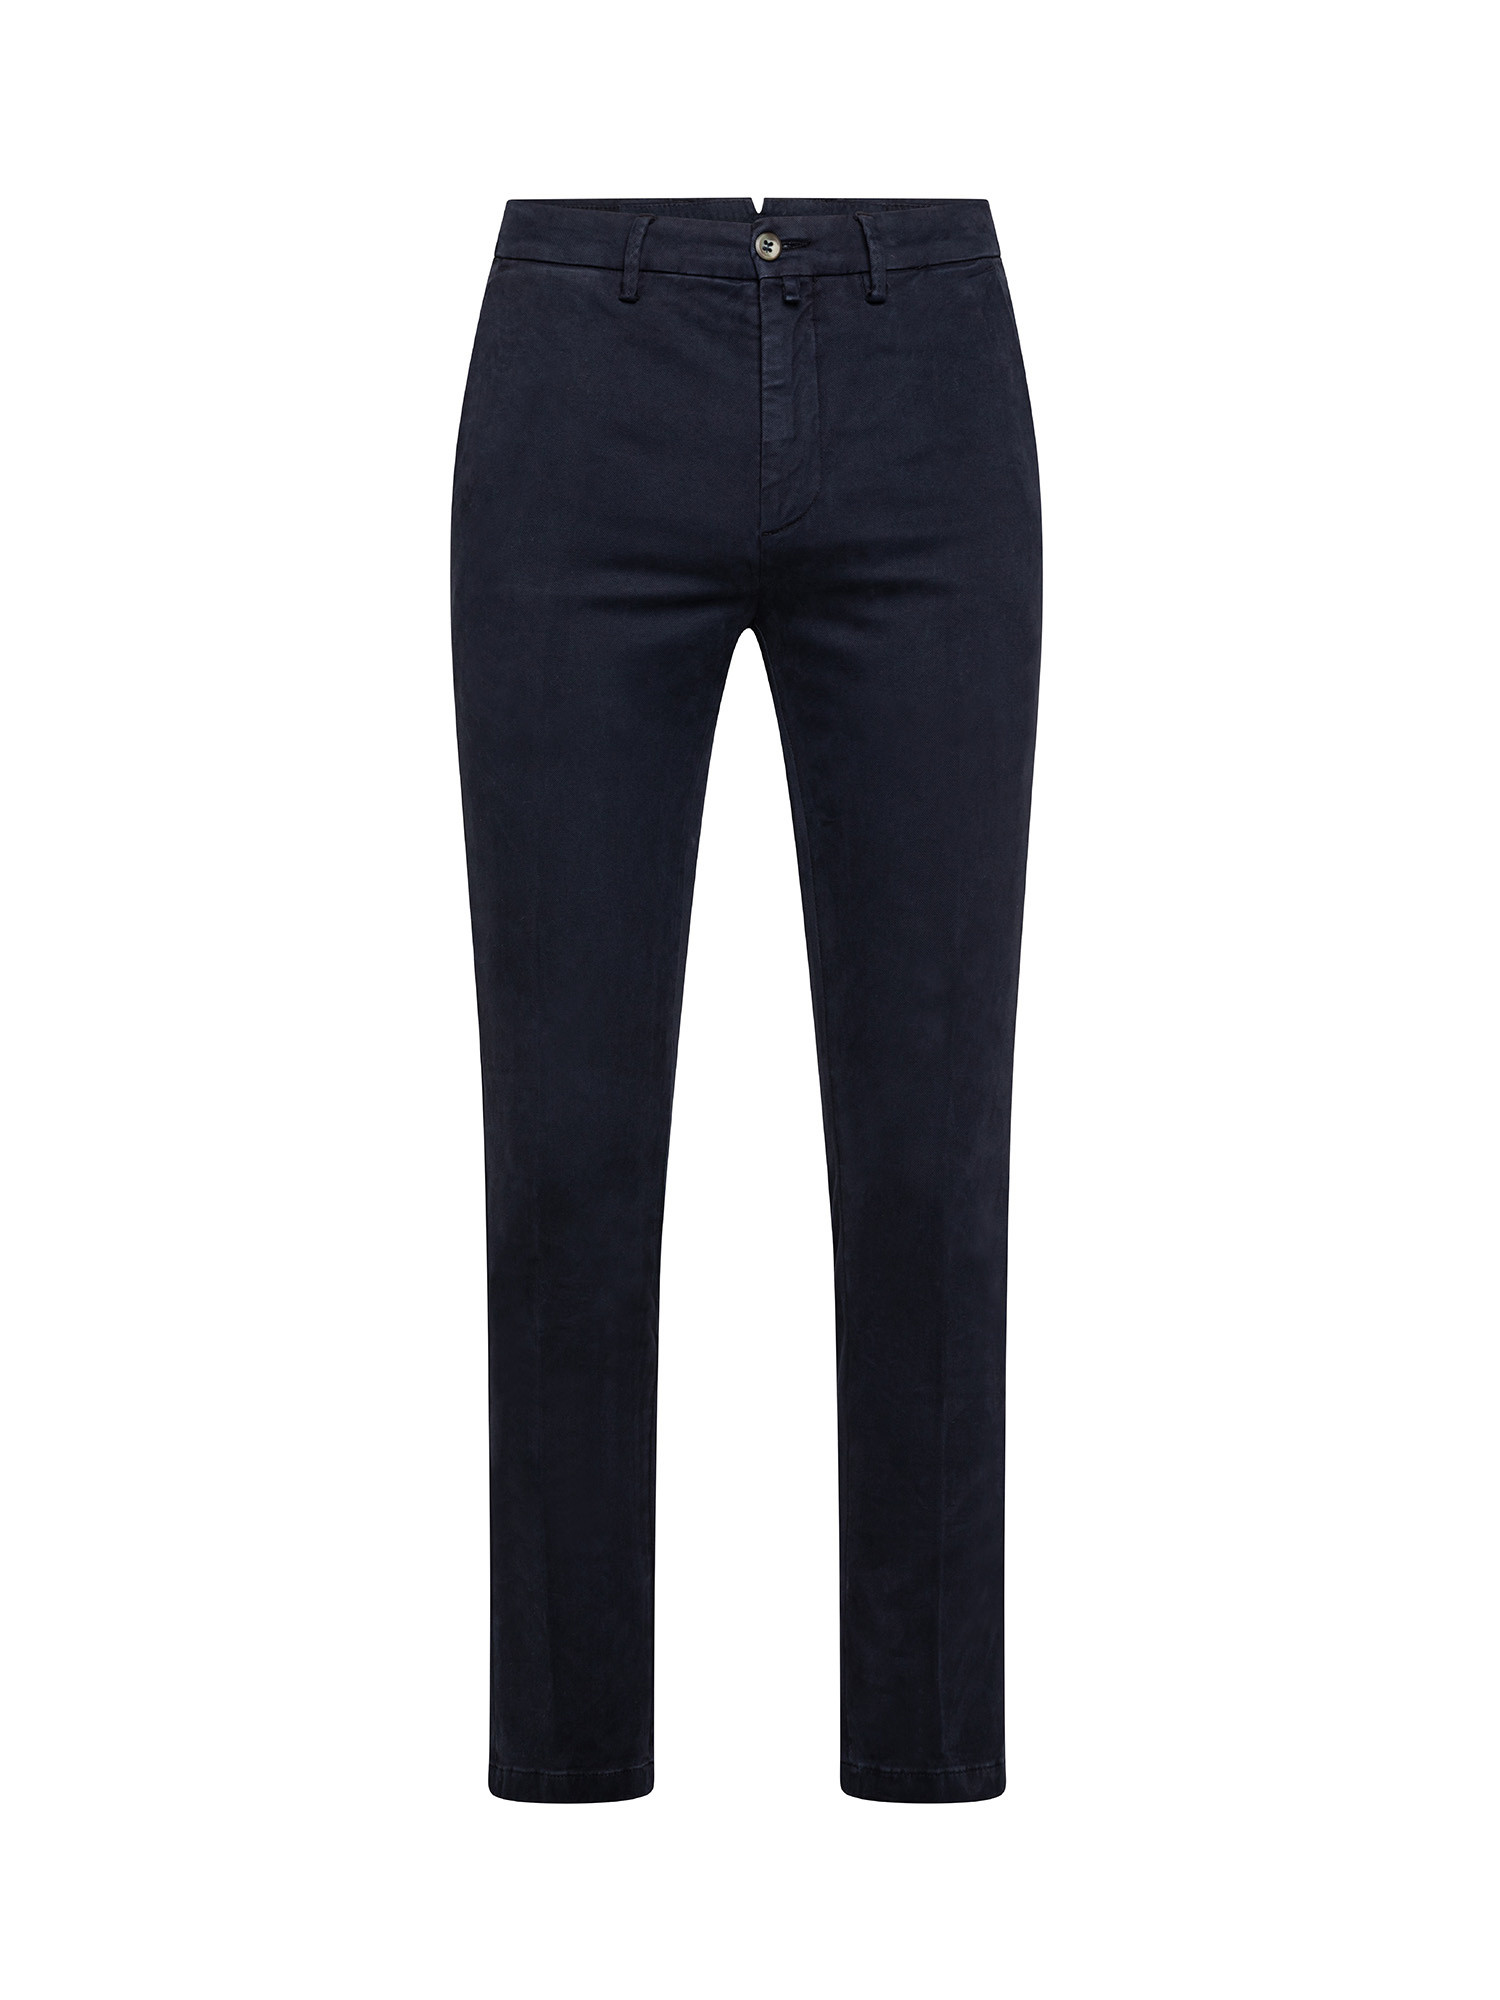 Chino trousers, Blue, large image number 0